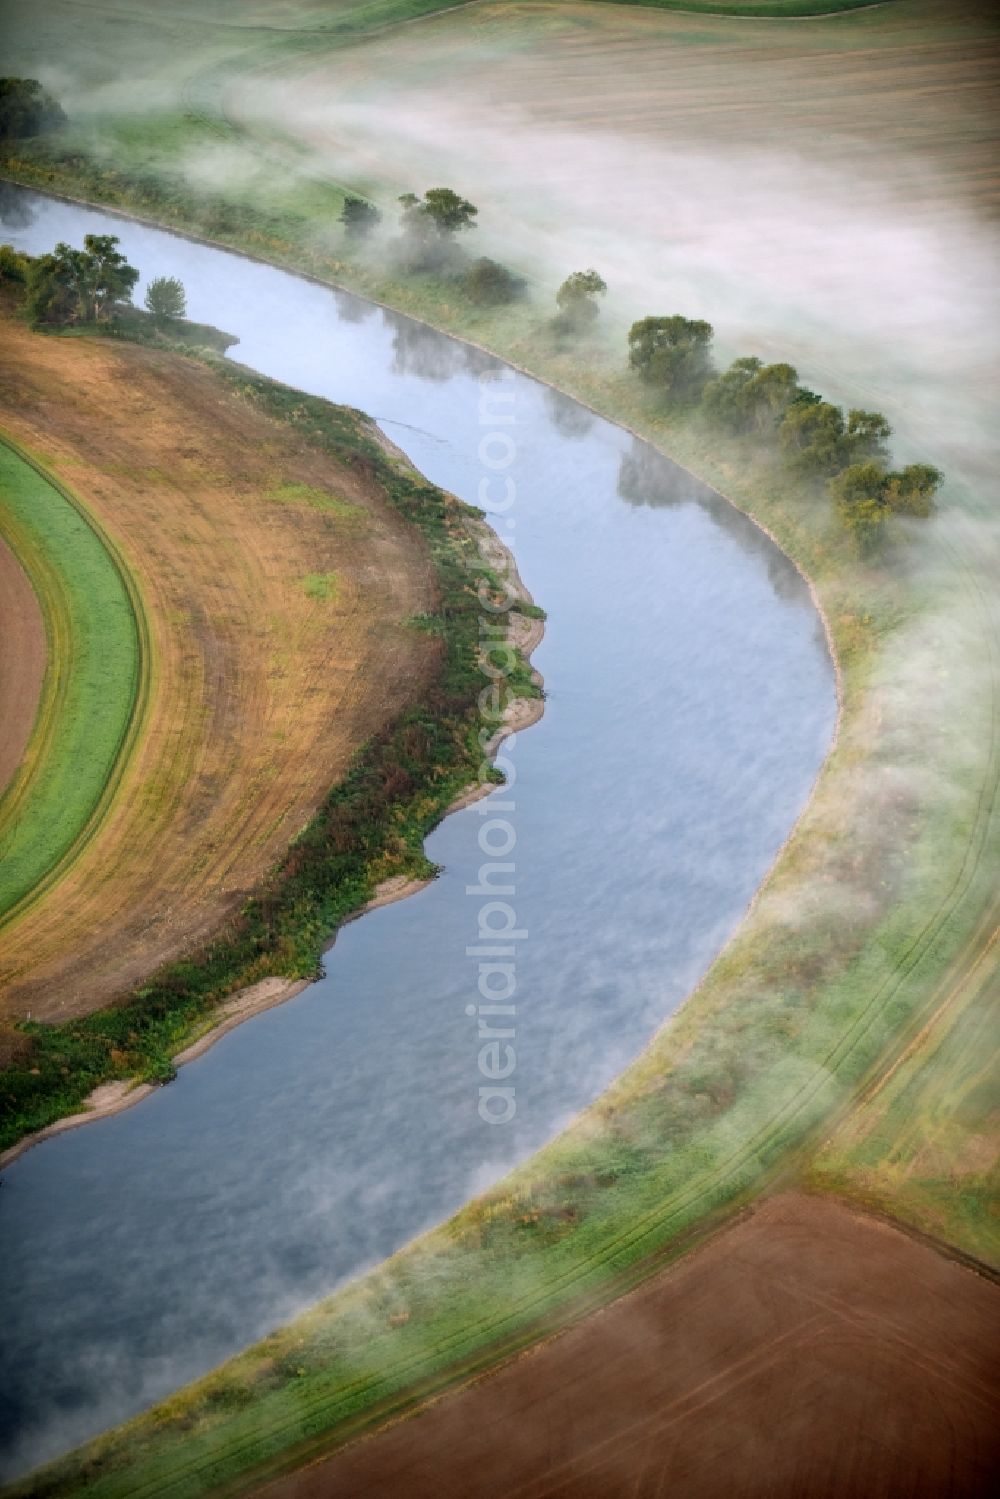 Groß Rosenburg from the bird's eye view: Fog swirling over a meadow and field landscape on curved loop of the riparian zones on the course of the river of Saale in Gross Rosenburg in the state Saxony-Anhalt, Germany